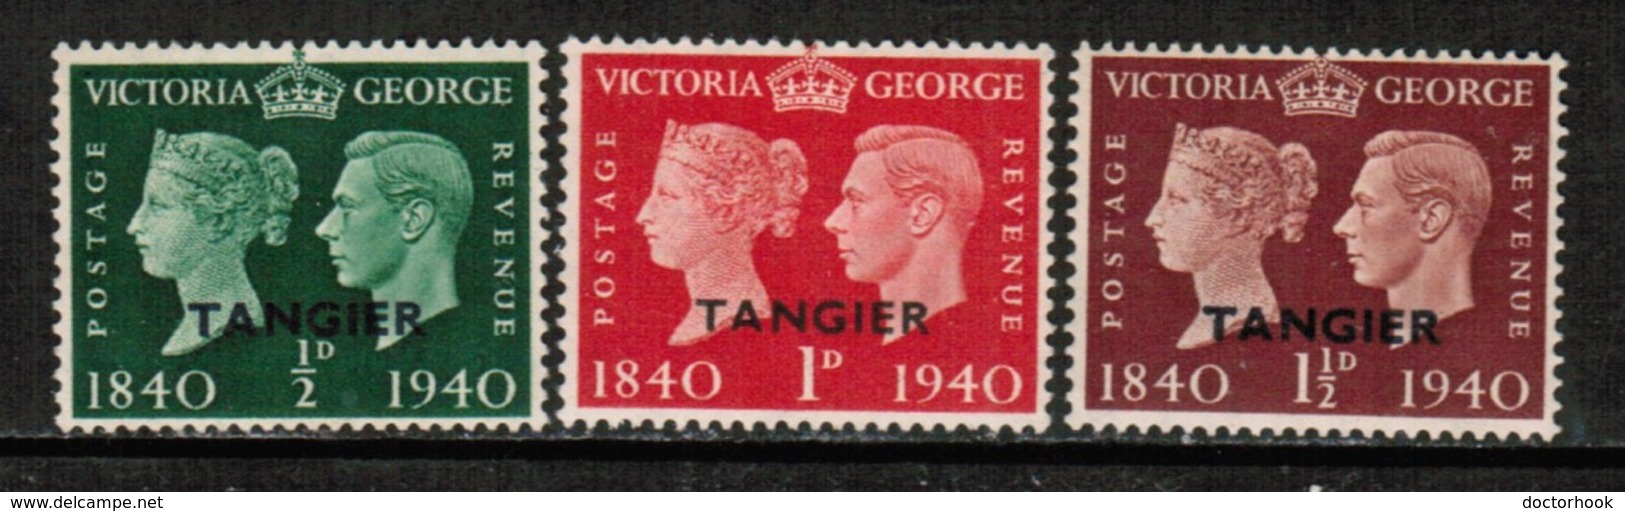 GREAT BRITAIN---Offices In Morocco  Scott # 518-20* VF MINT LH  (Stamp Scan # 525) - Morocco Agencies / Tangier (...-1958)